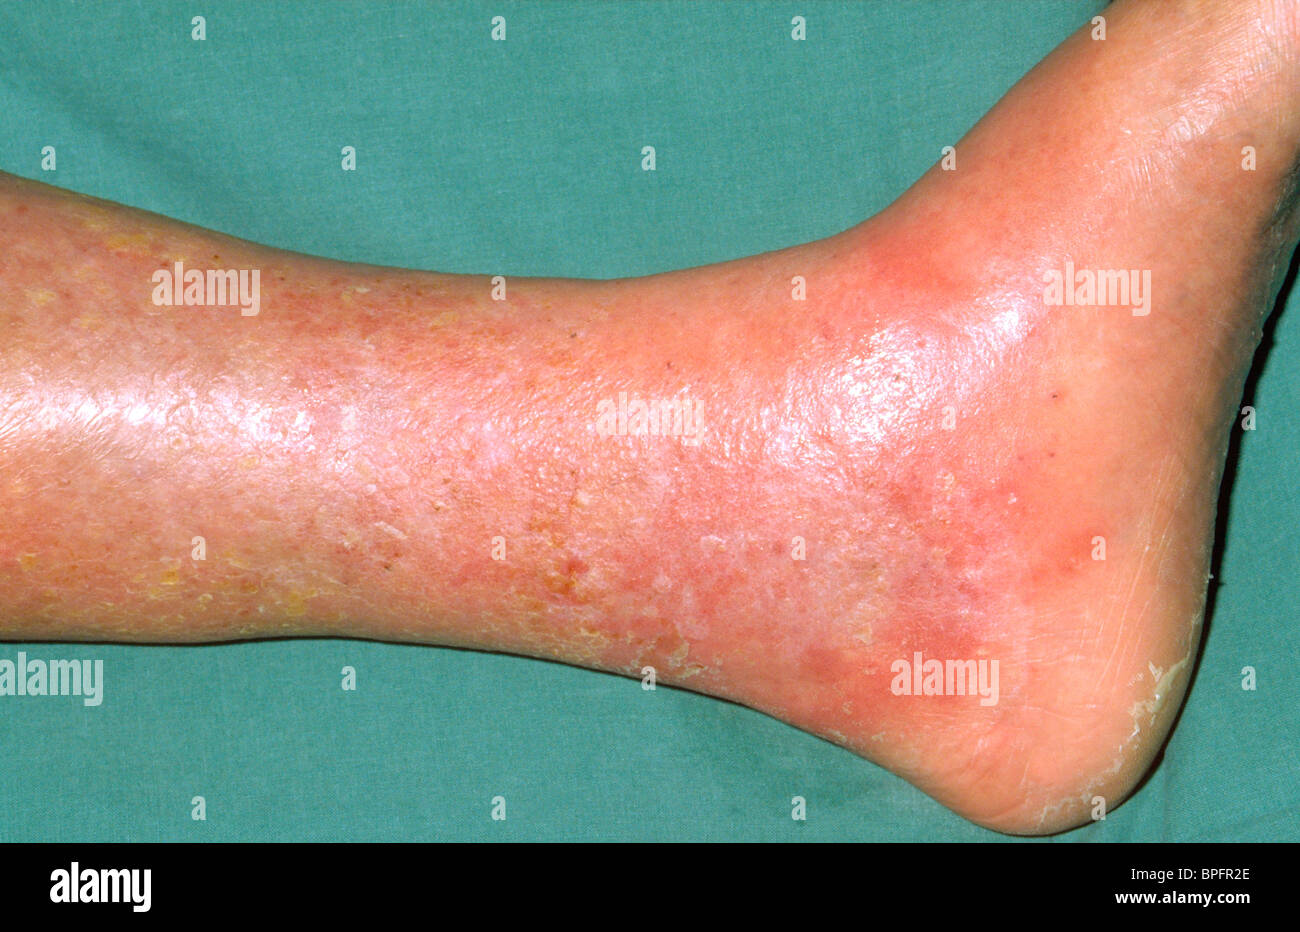 An example of necrotic lesions on the leg in which the superficial epithelium is destroyed. Stock Photo